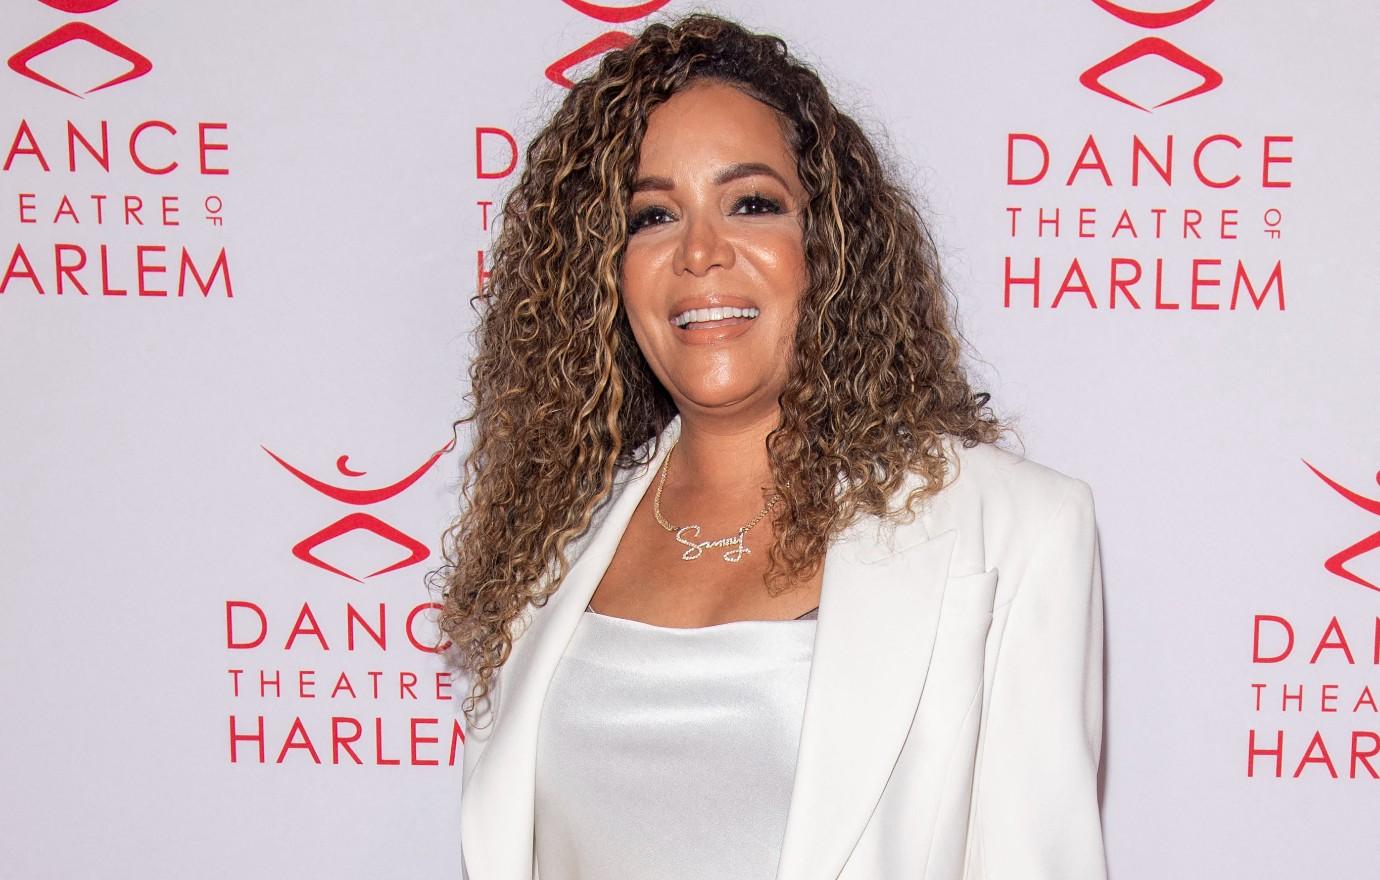 Sunny Hostin 'Disappointed' By Lack Of Diversity In Media